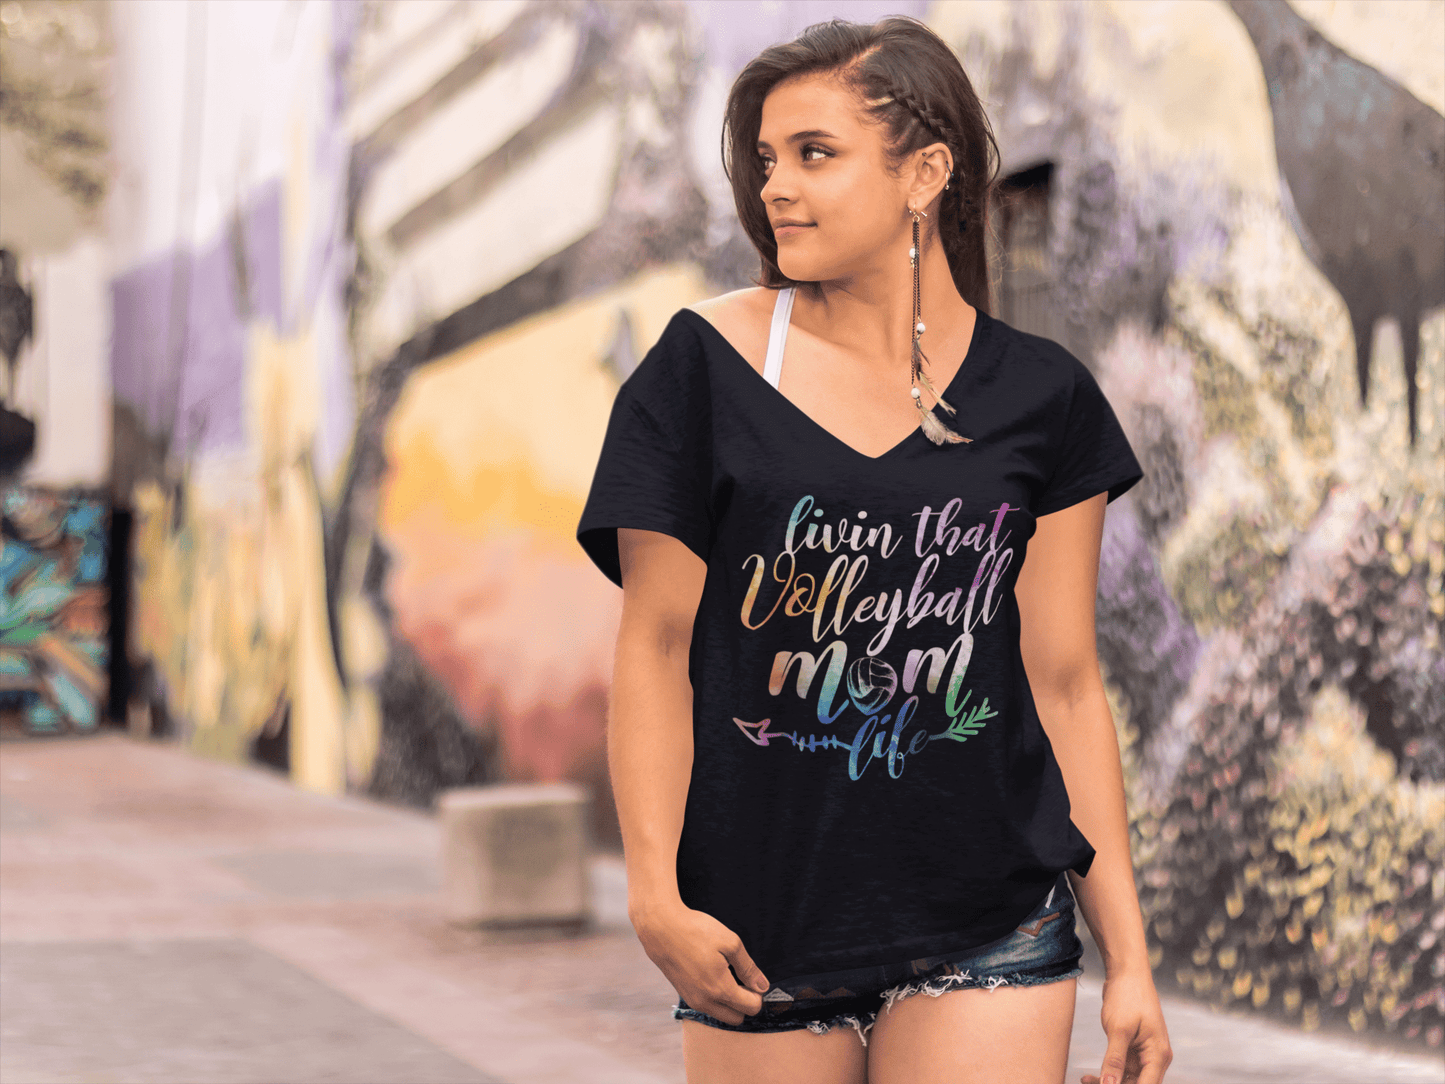 ULTRABASIC Women's V-Neck T-Shirt Livin That Volleyball Life - Funny Quote